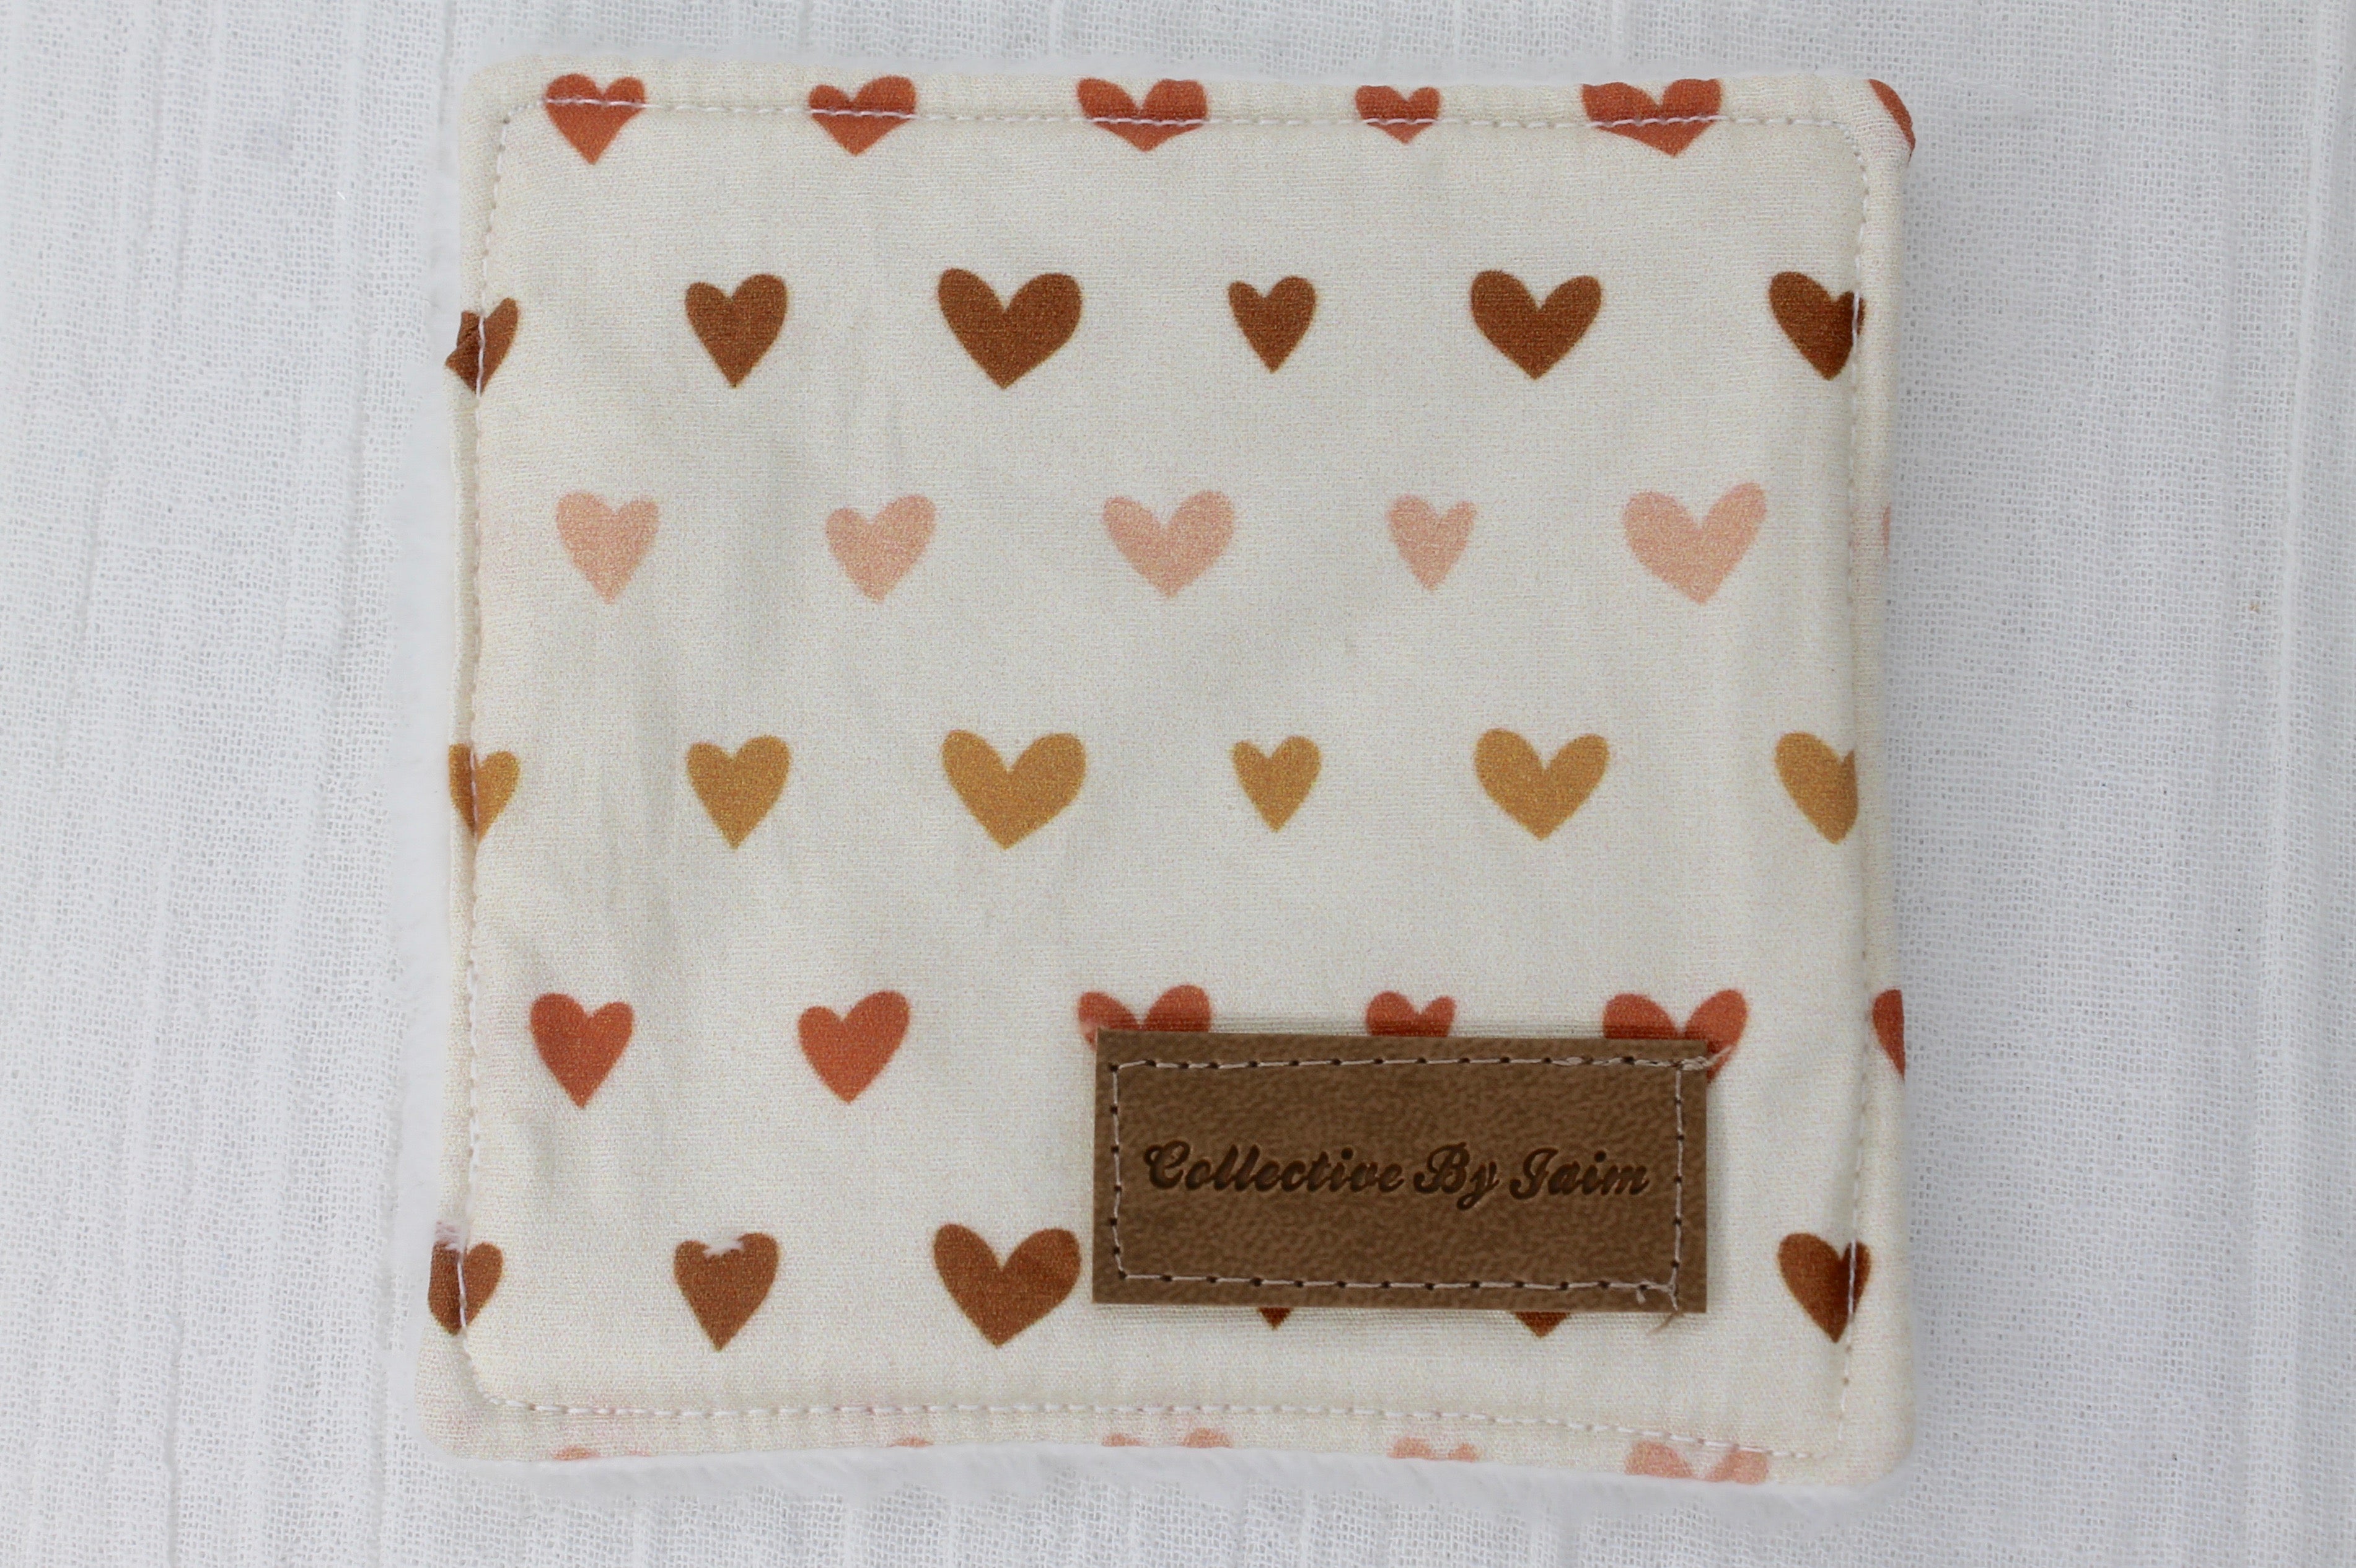 Square Make-up Wipe - Neutral Heart